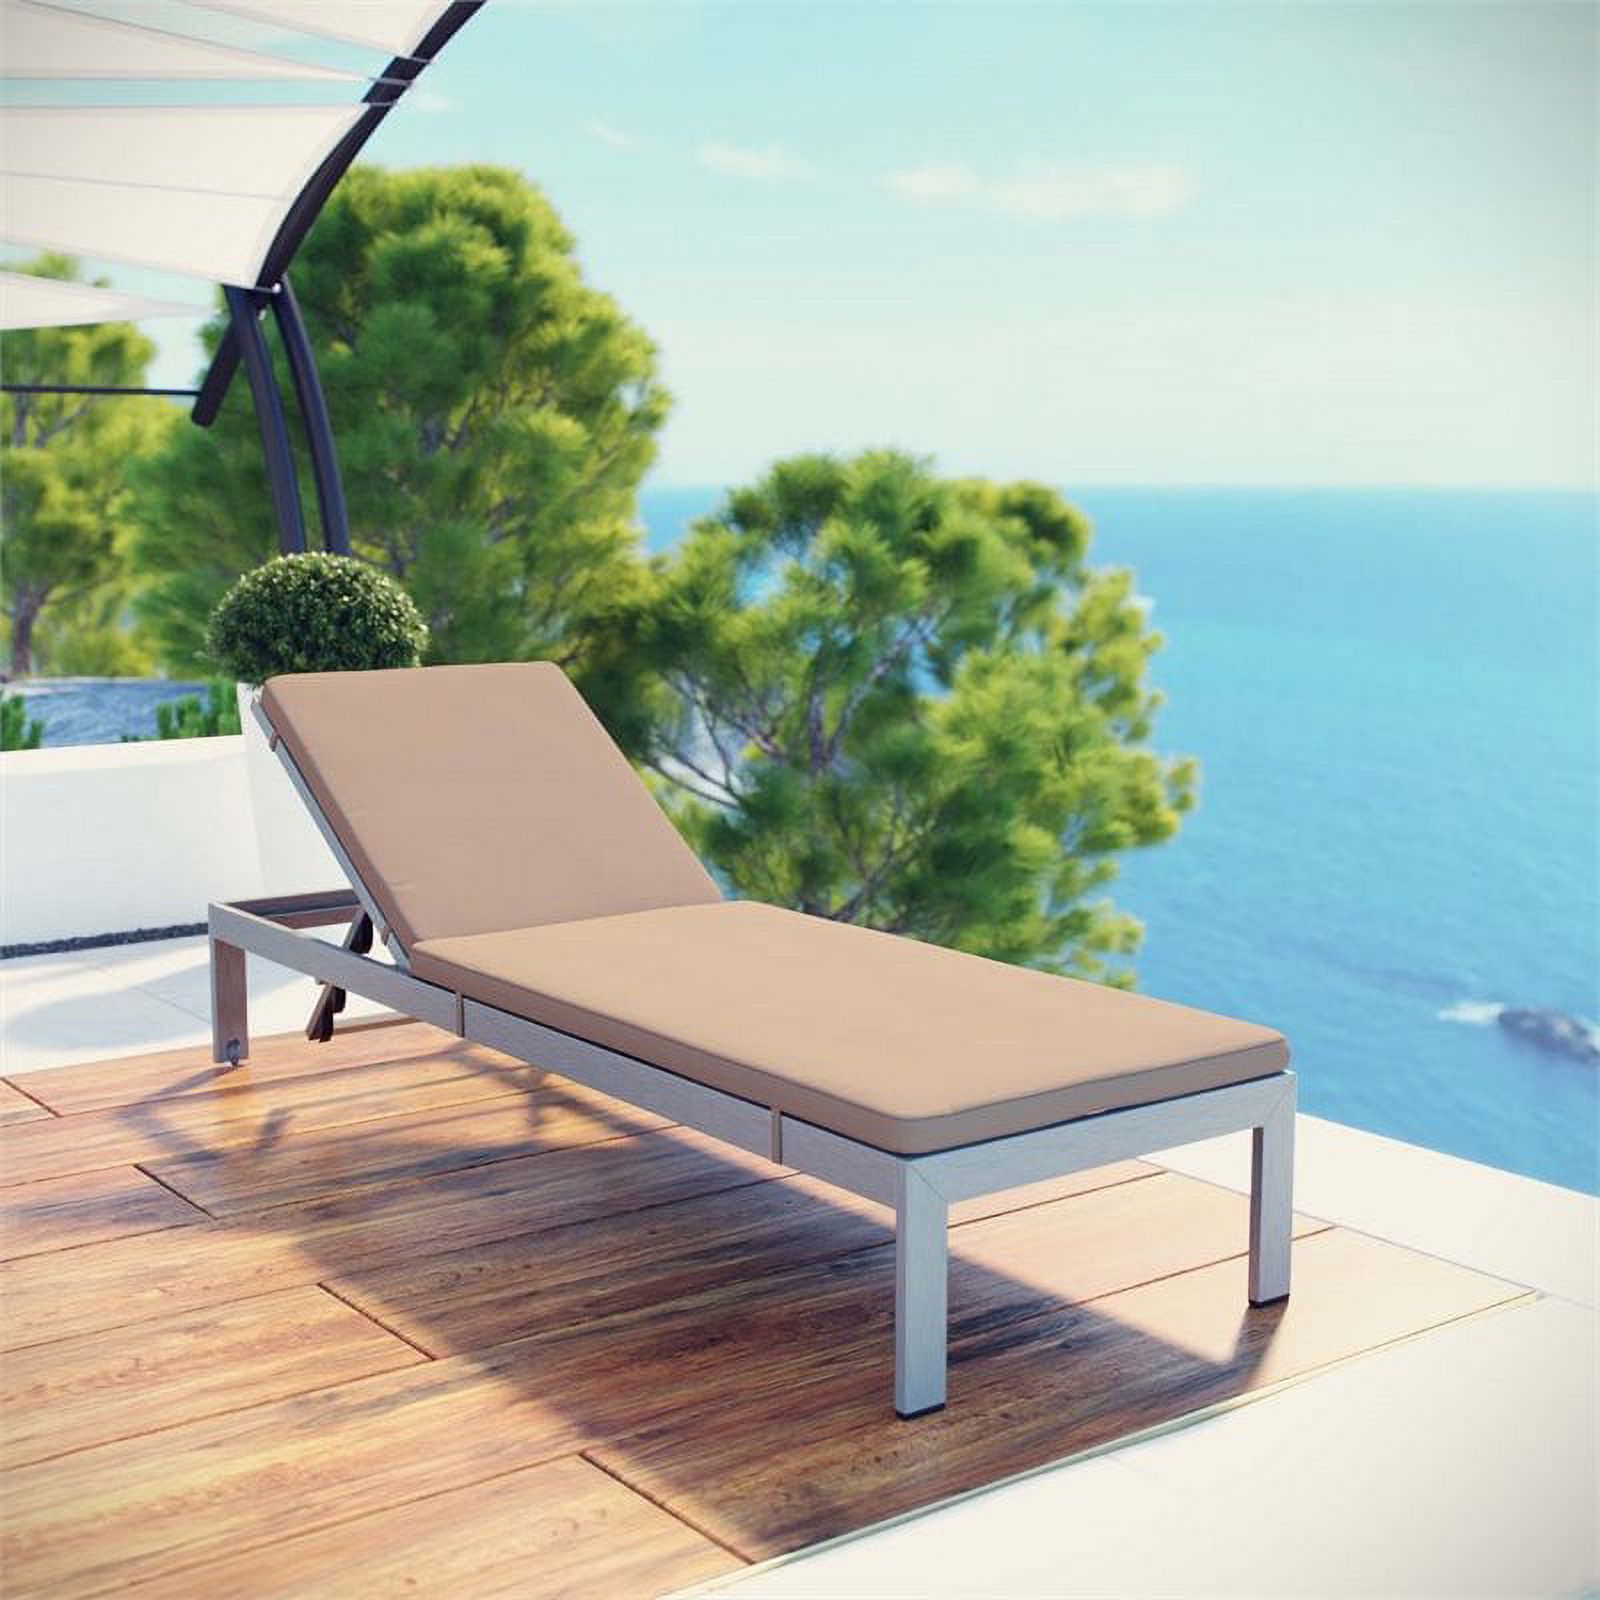 Pemberly Row  Plastic Wood Reclining Patio Chaise Lounge in Silver and Mocha - image 2 of 4